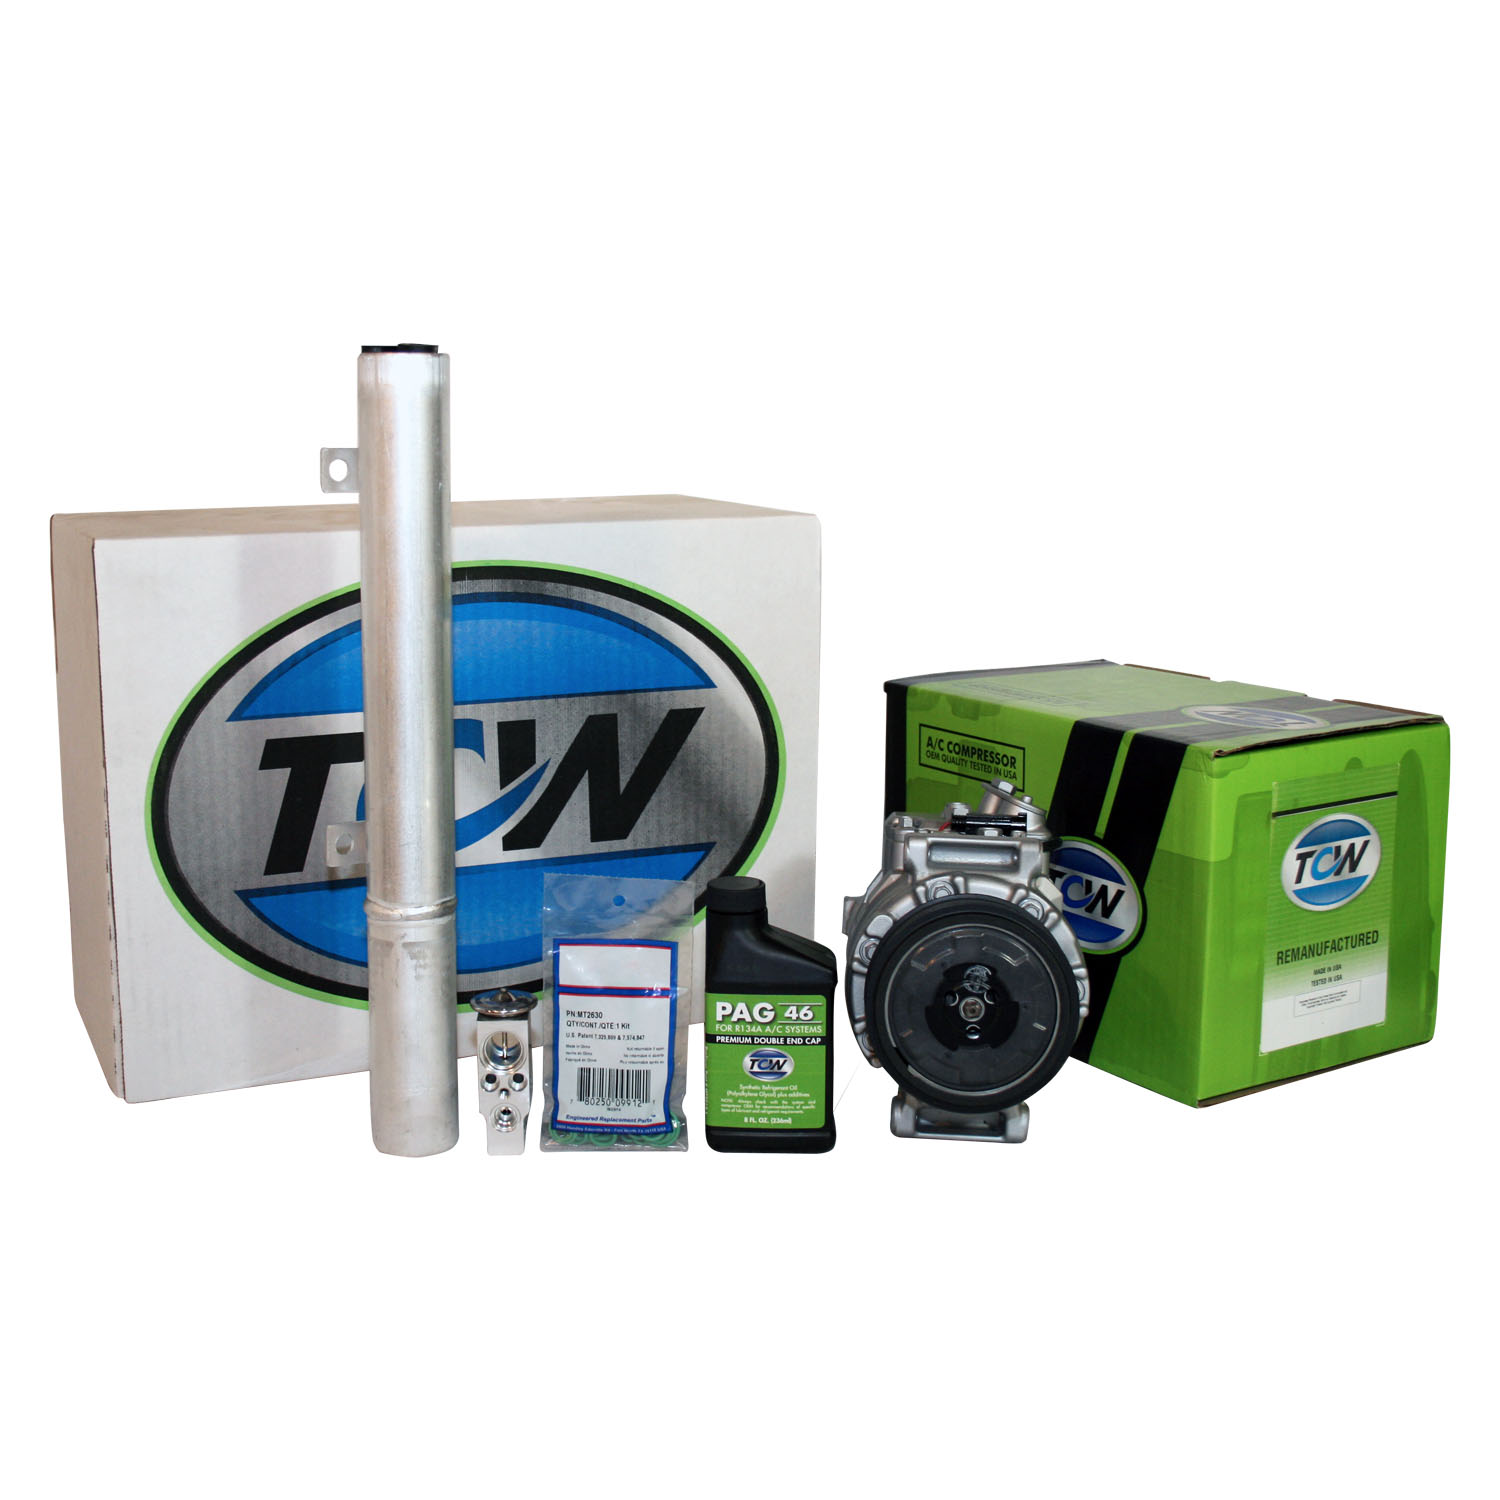 TCW Vehicle A/C Kit K1000418R Remanufactured Product Image field_60b6a13a6e67c